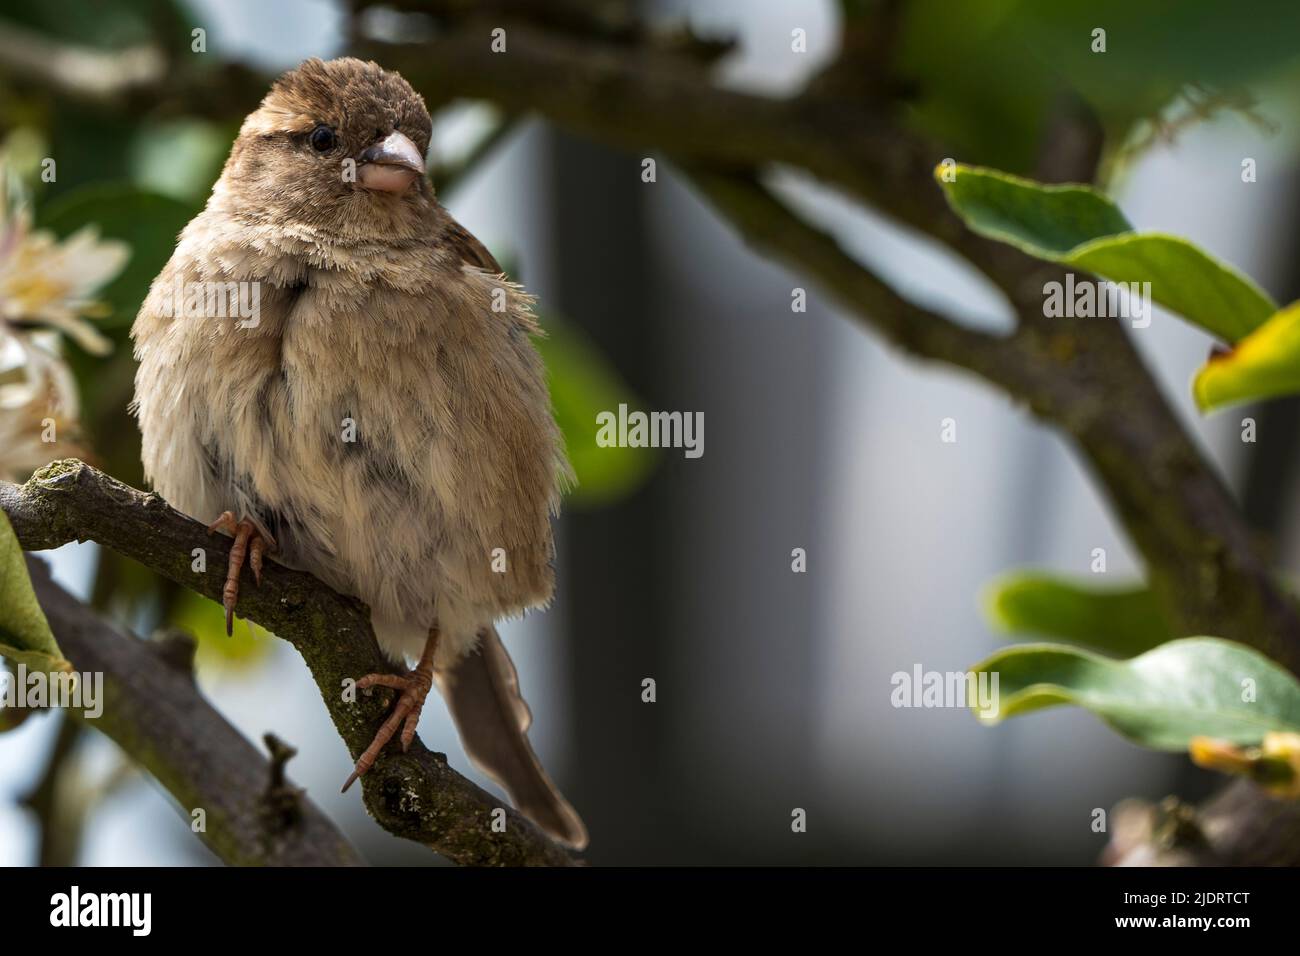 Close-up of a sparrow sitting on a branch with green leaves Stock Photo